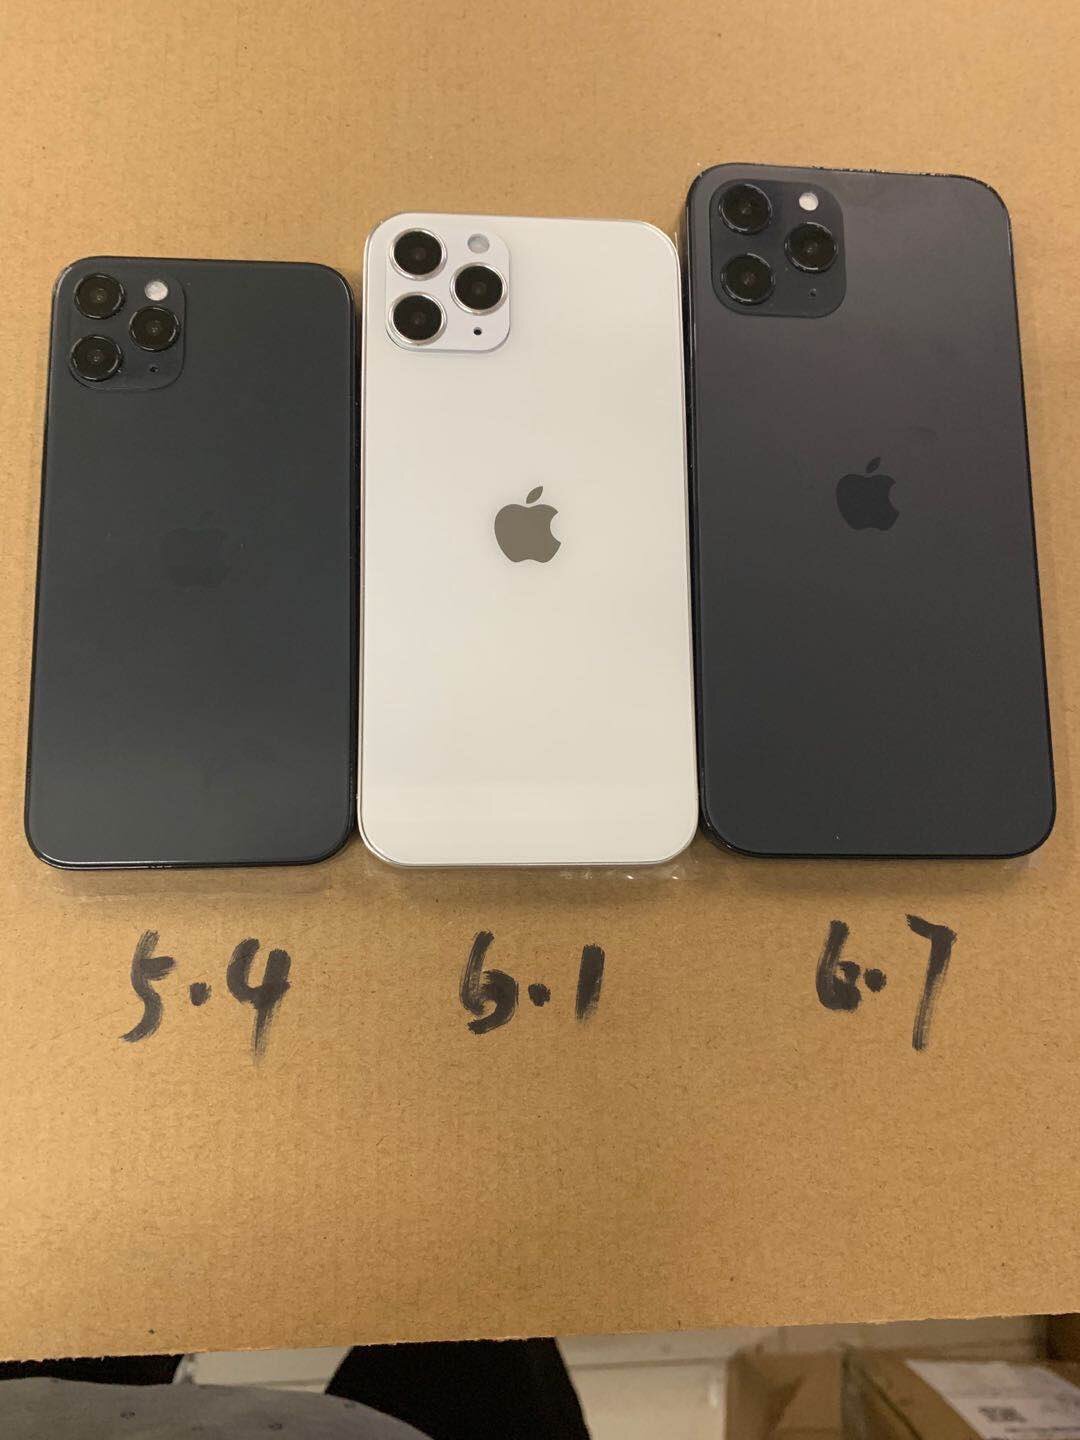 Apple iPhone 12 series dummy models tweeted by Sonny Dickson - Dummy units reveal the three different 5G Apple iPhone 12 screen sizes